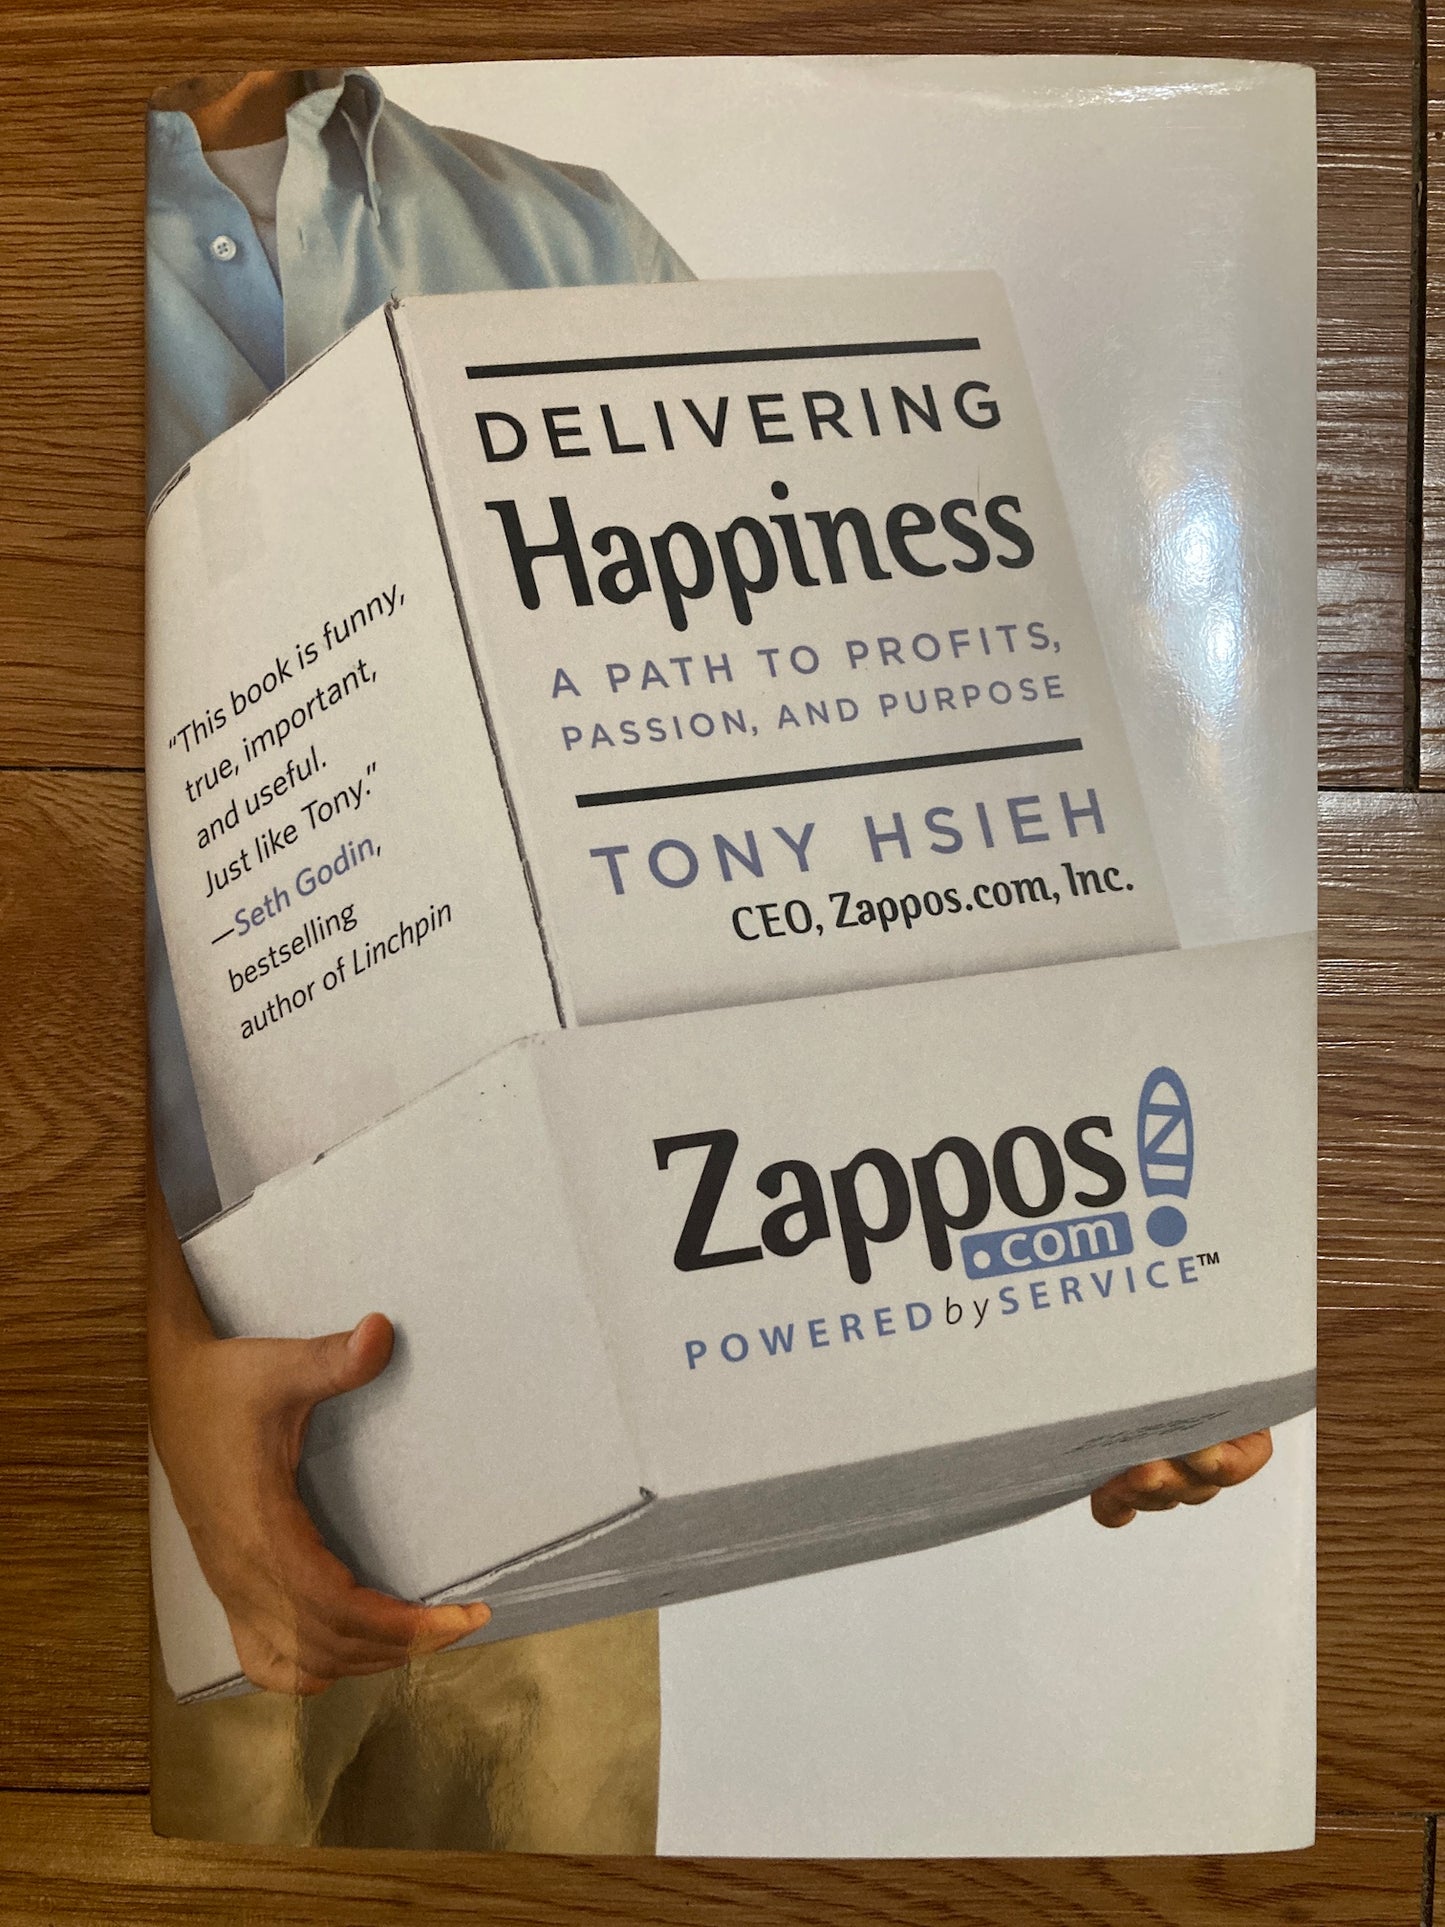 Purpose　Passion,　and　to　Path　Delivering　A　Happiness:　Profits,　–　SercelShop